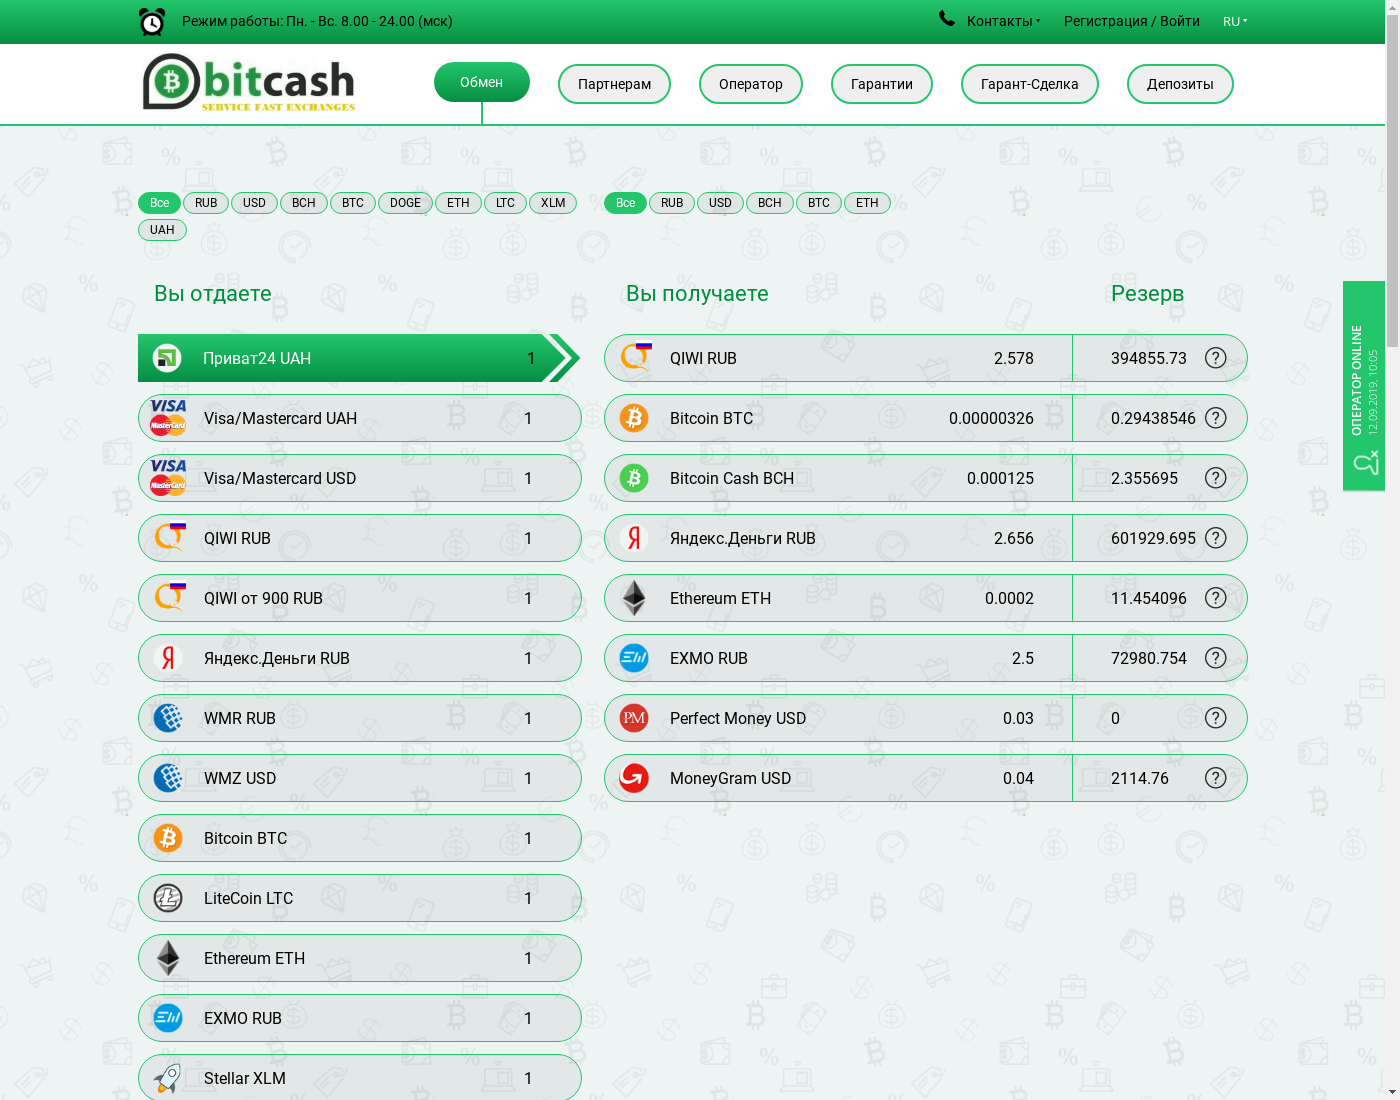 bitcash user interface: the home page in English